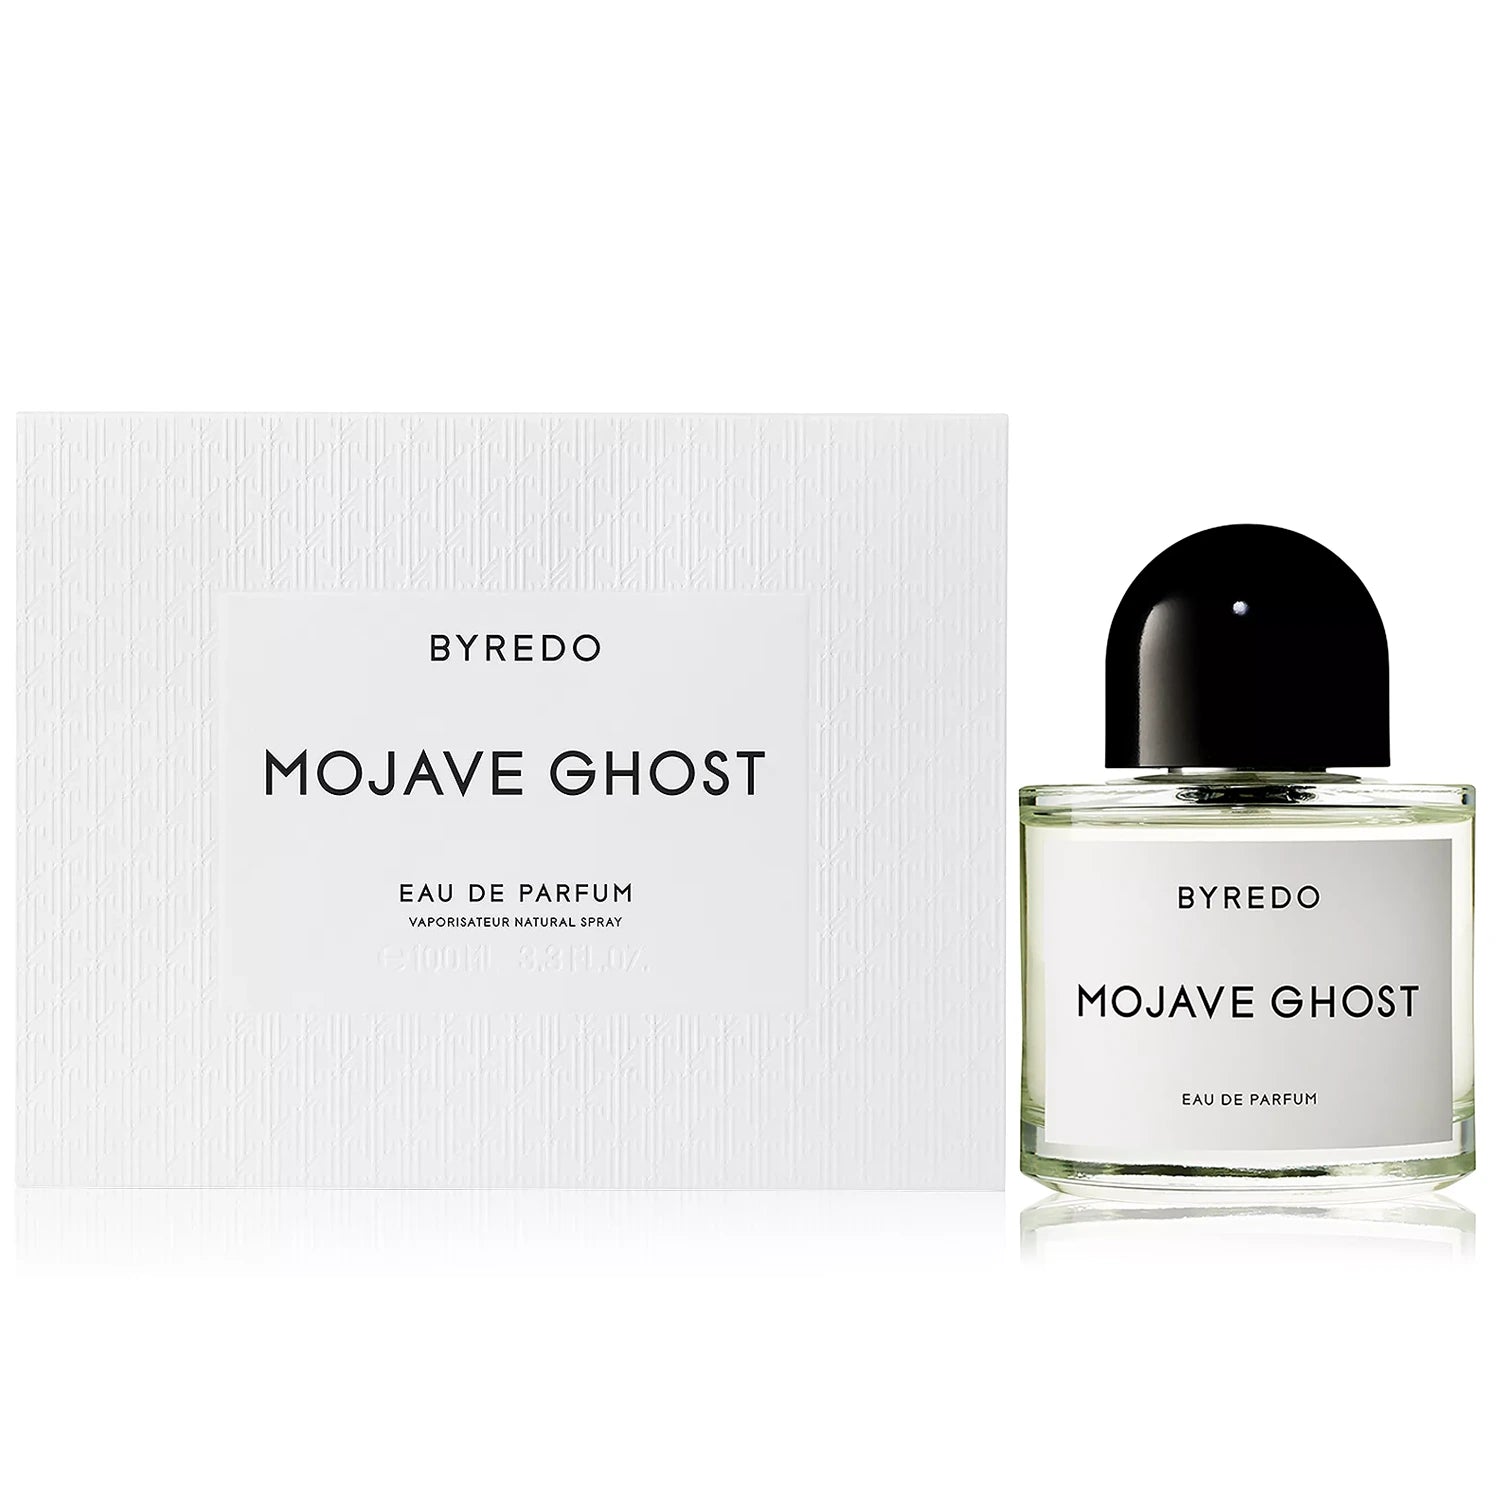 <p>Uncover the majestic beauty of Byredo's Mojave Ghost unisex EDP. The captivating scent is inspired by the resilient Ghost Flower, Mohavea confertiflora, of the Mojave Desert. With an amazing feat of mimicry, this flower uses markings to attract pollinators of a neighboring plant species- exemplifying its strength and ingenuity. Treat yourself to this beautiful, rare scent.</p>
<p data-mce-fragment="1"><strong data-mce-fragment="1">Style:<span data-mce-fragment="1"> </span></strong>Woody, aromatic.<br><strong data-mce-fragment="1">Notes: </strong>Top: ambrette, Jamaican nesberry. Middle: violet, sandalwood, magnolia. Base: chantilly musk, crisp amber, cedarwood.</p>